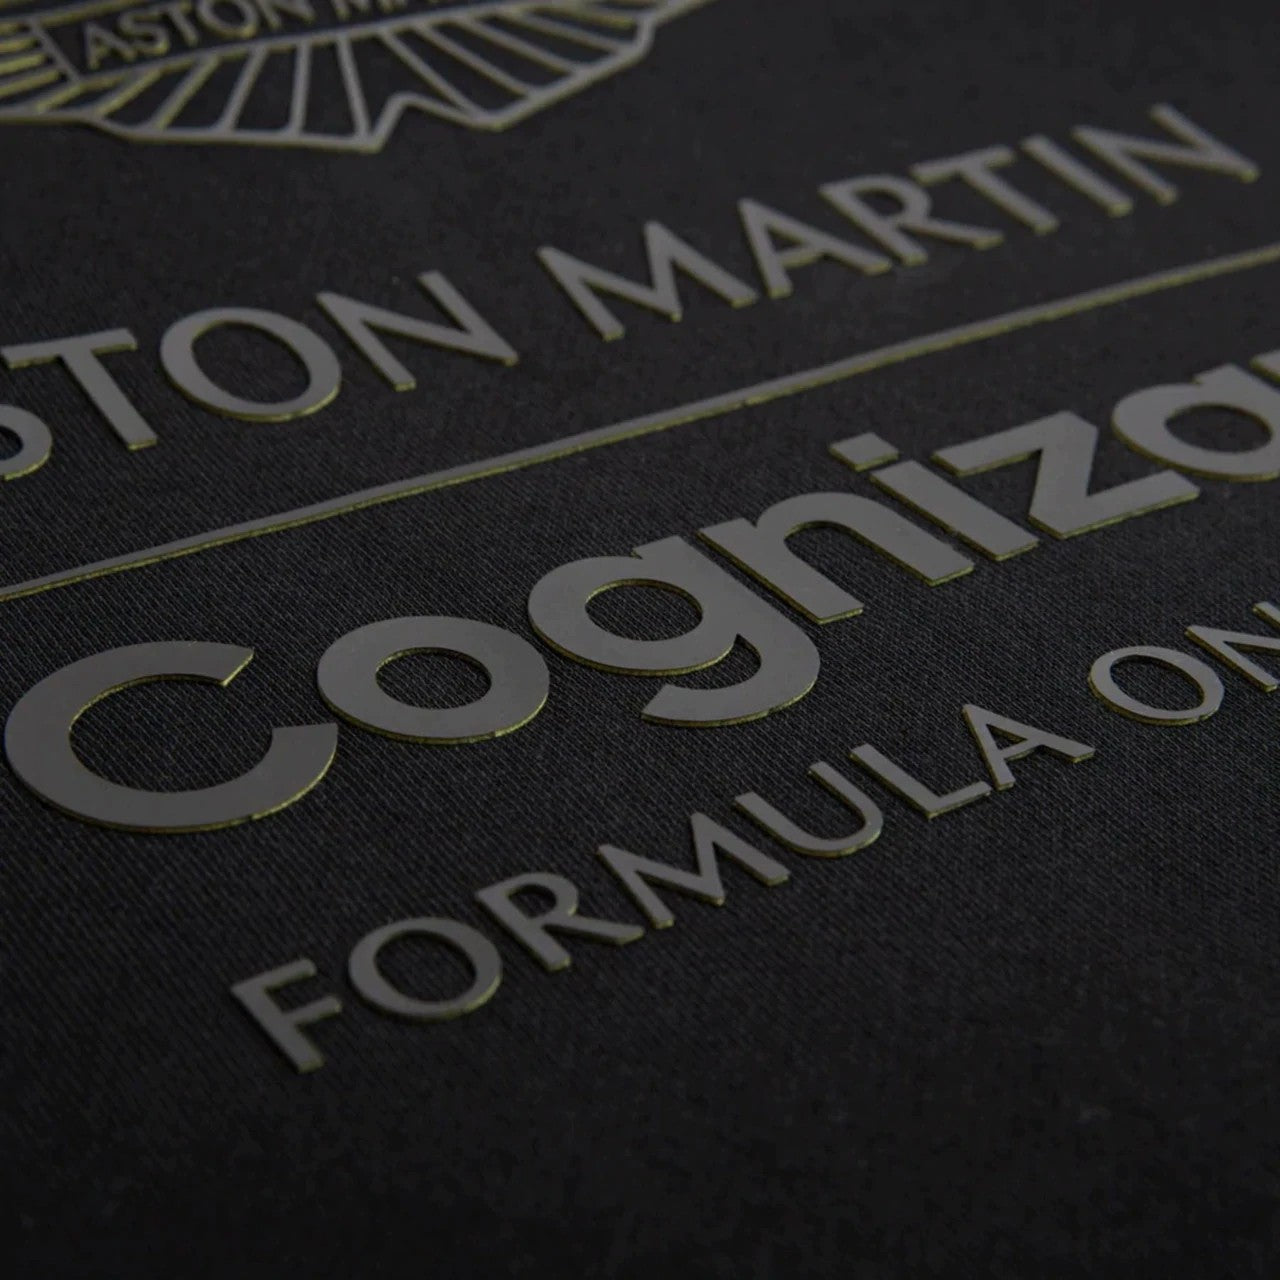 2022 Aston Martin Cognizant F1 Official Lifestyle Hoodie Black